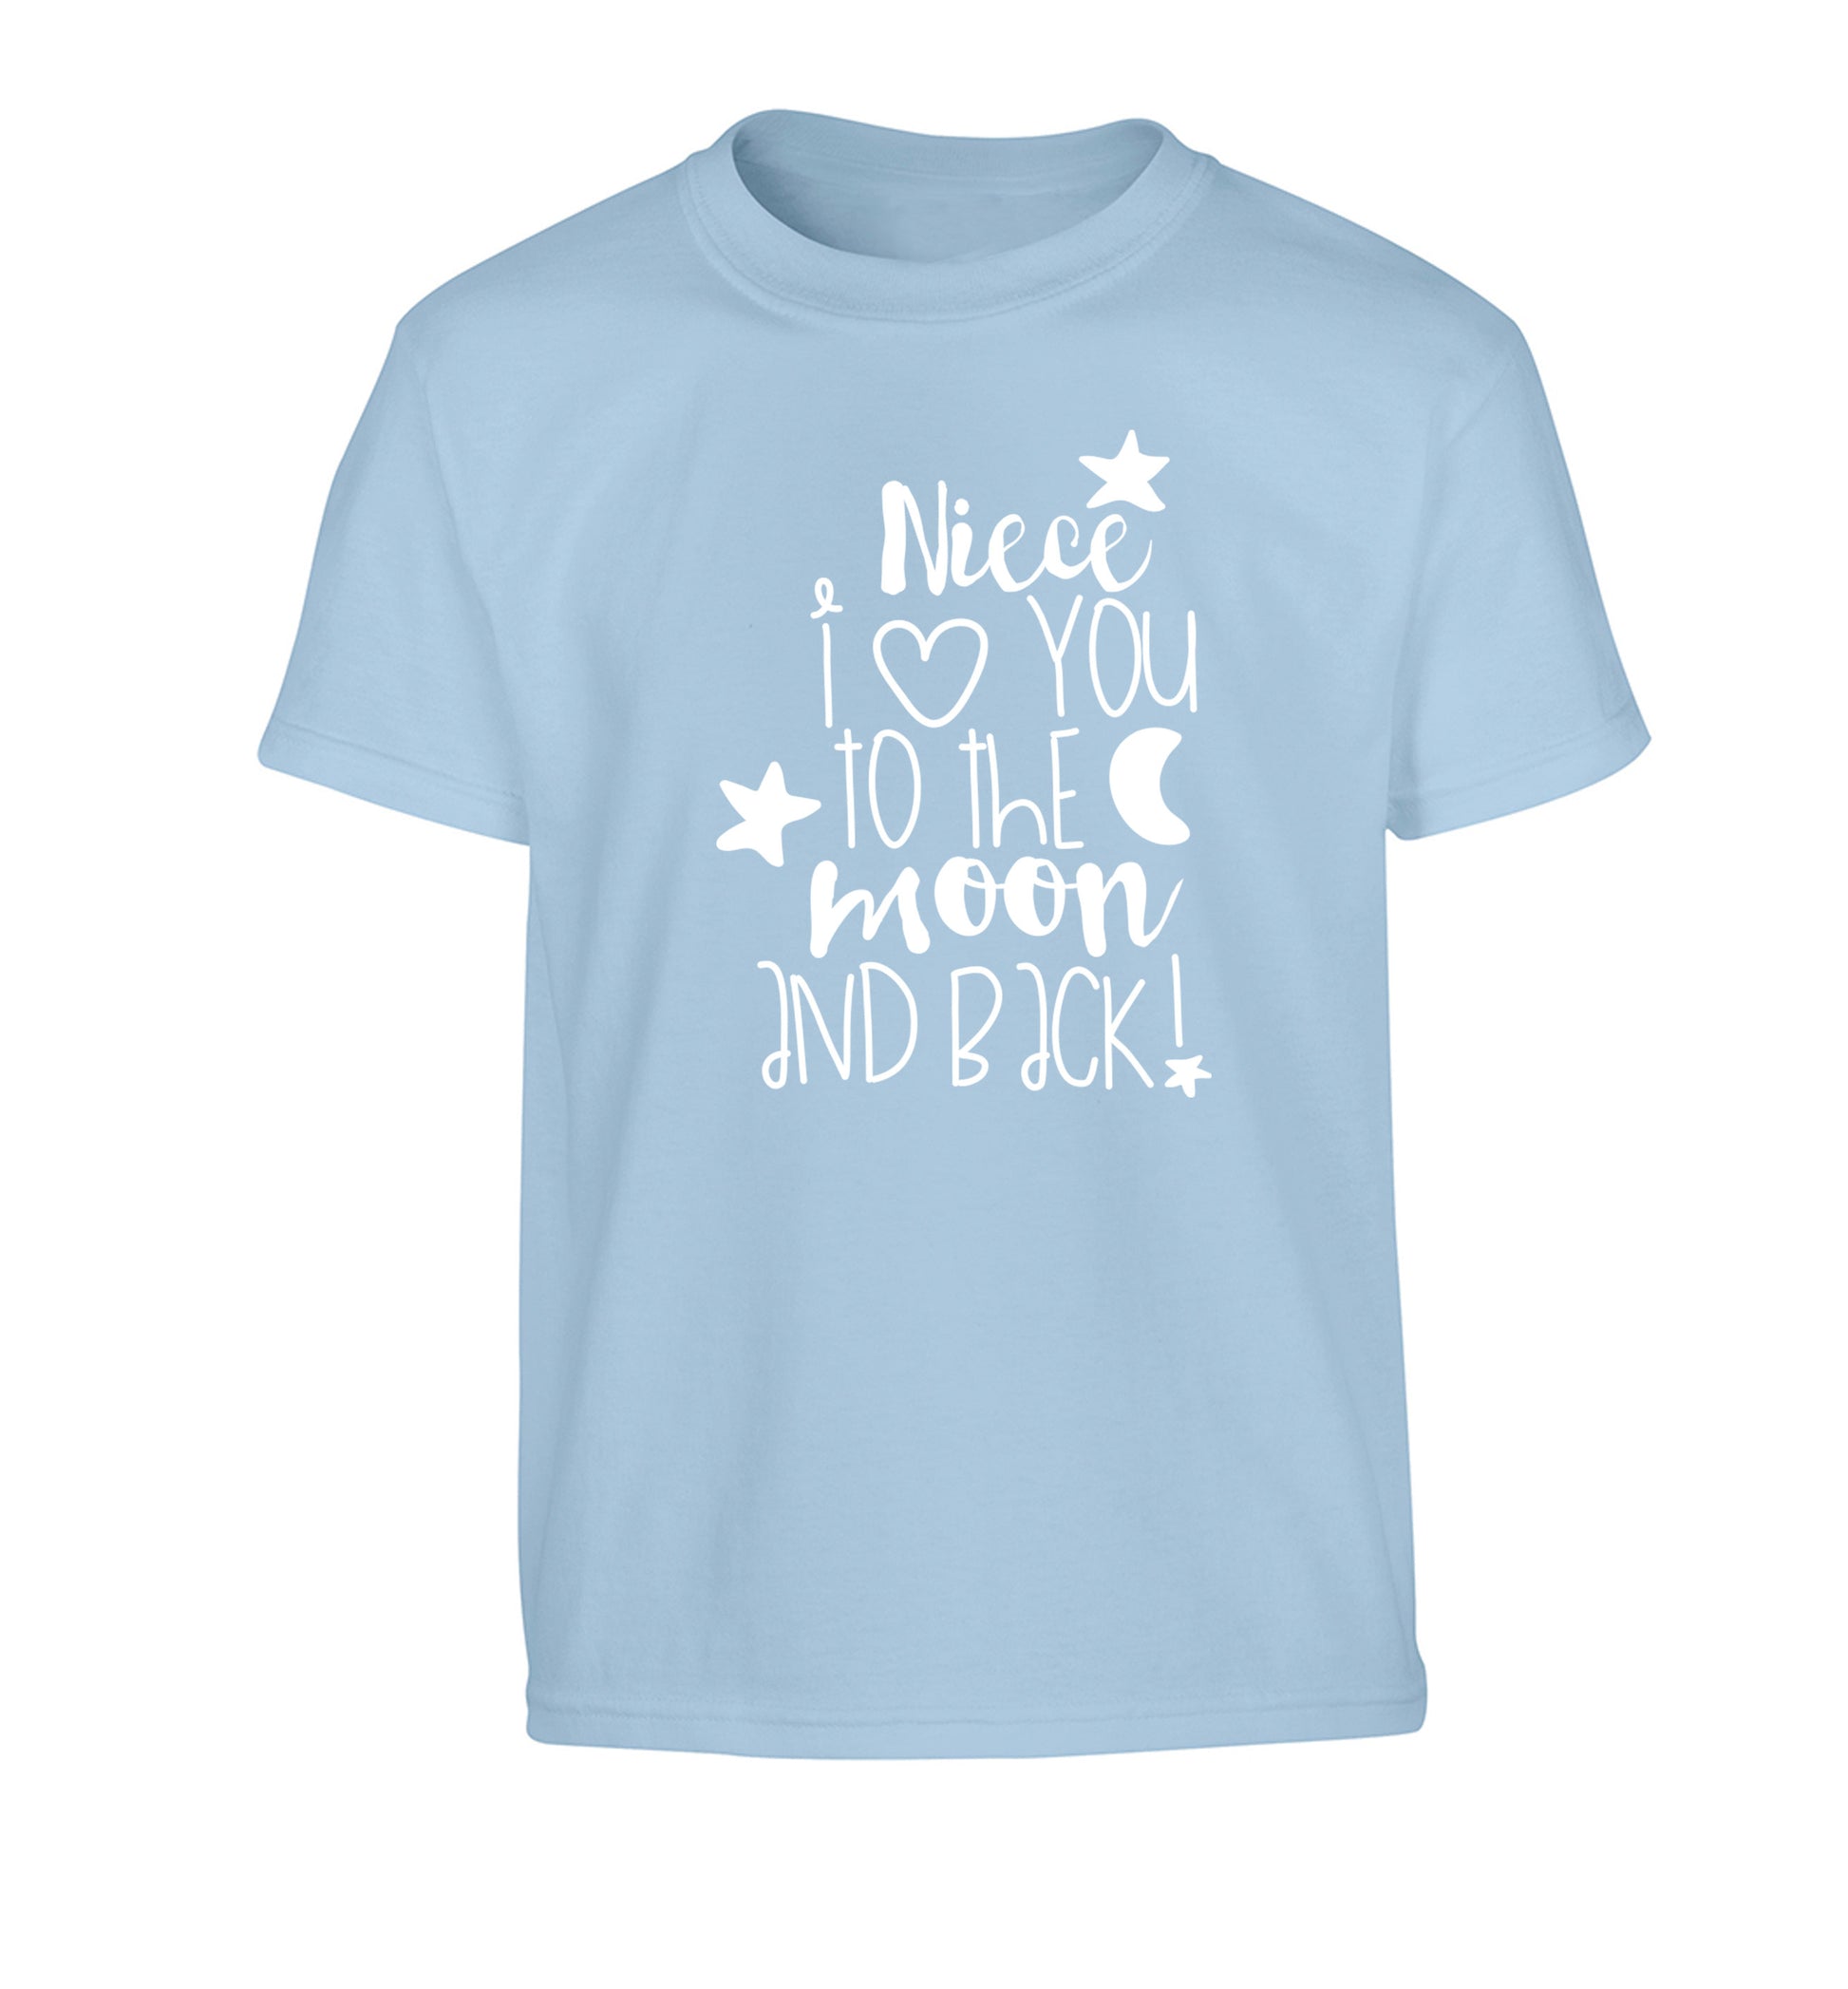 Niece I love you to the moon and back Children's light blue Tshirt 12-14 Years